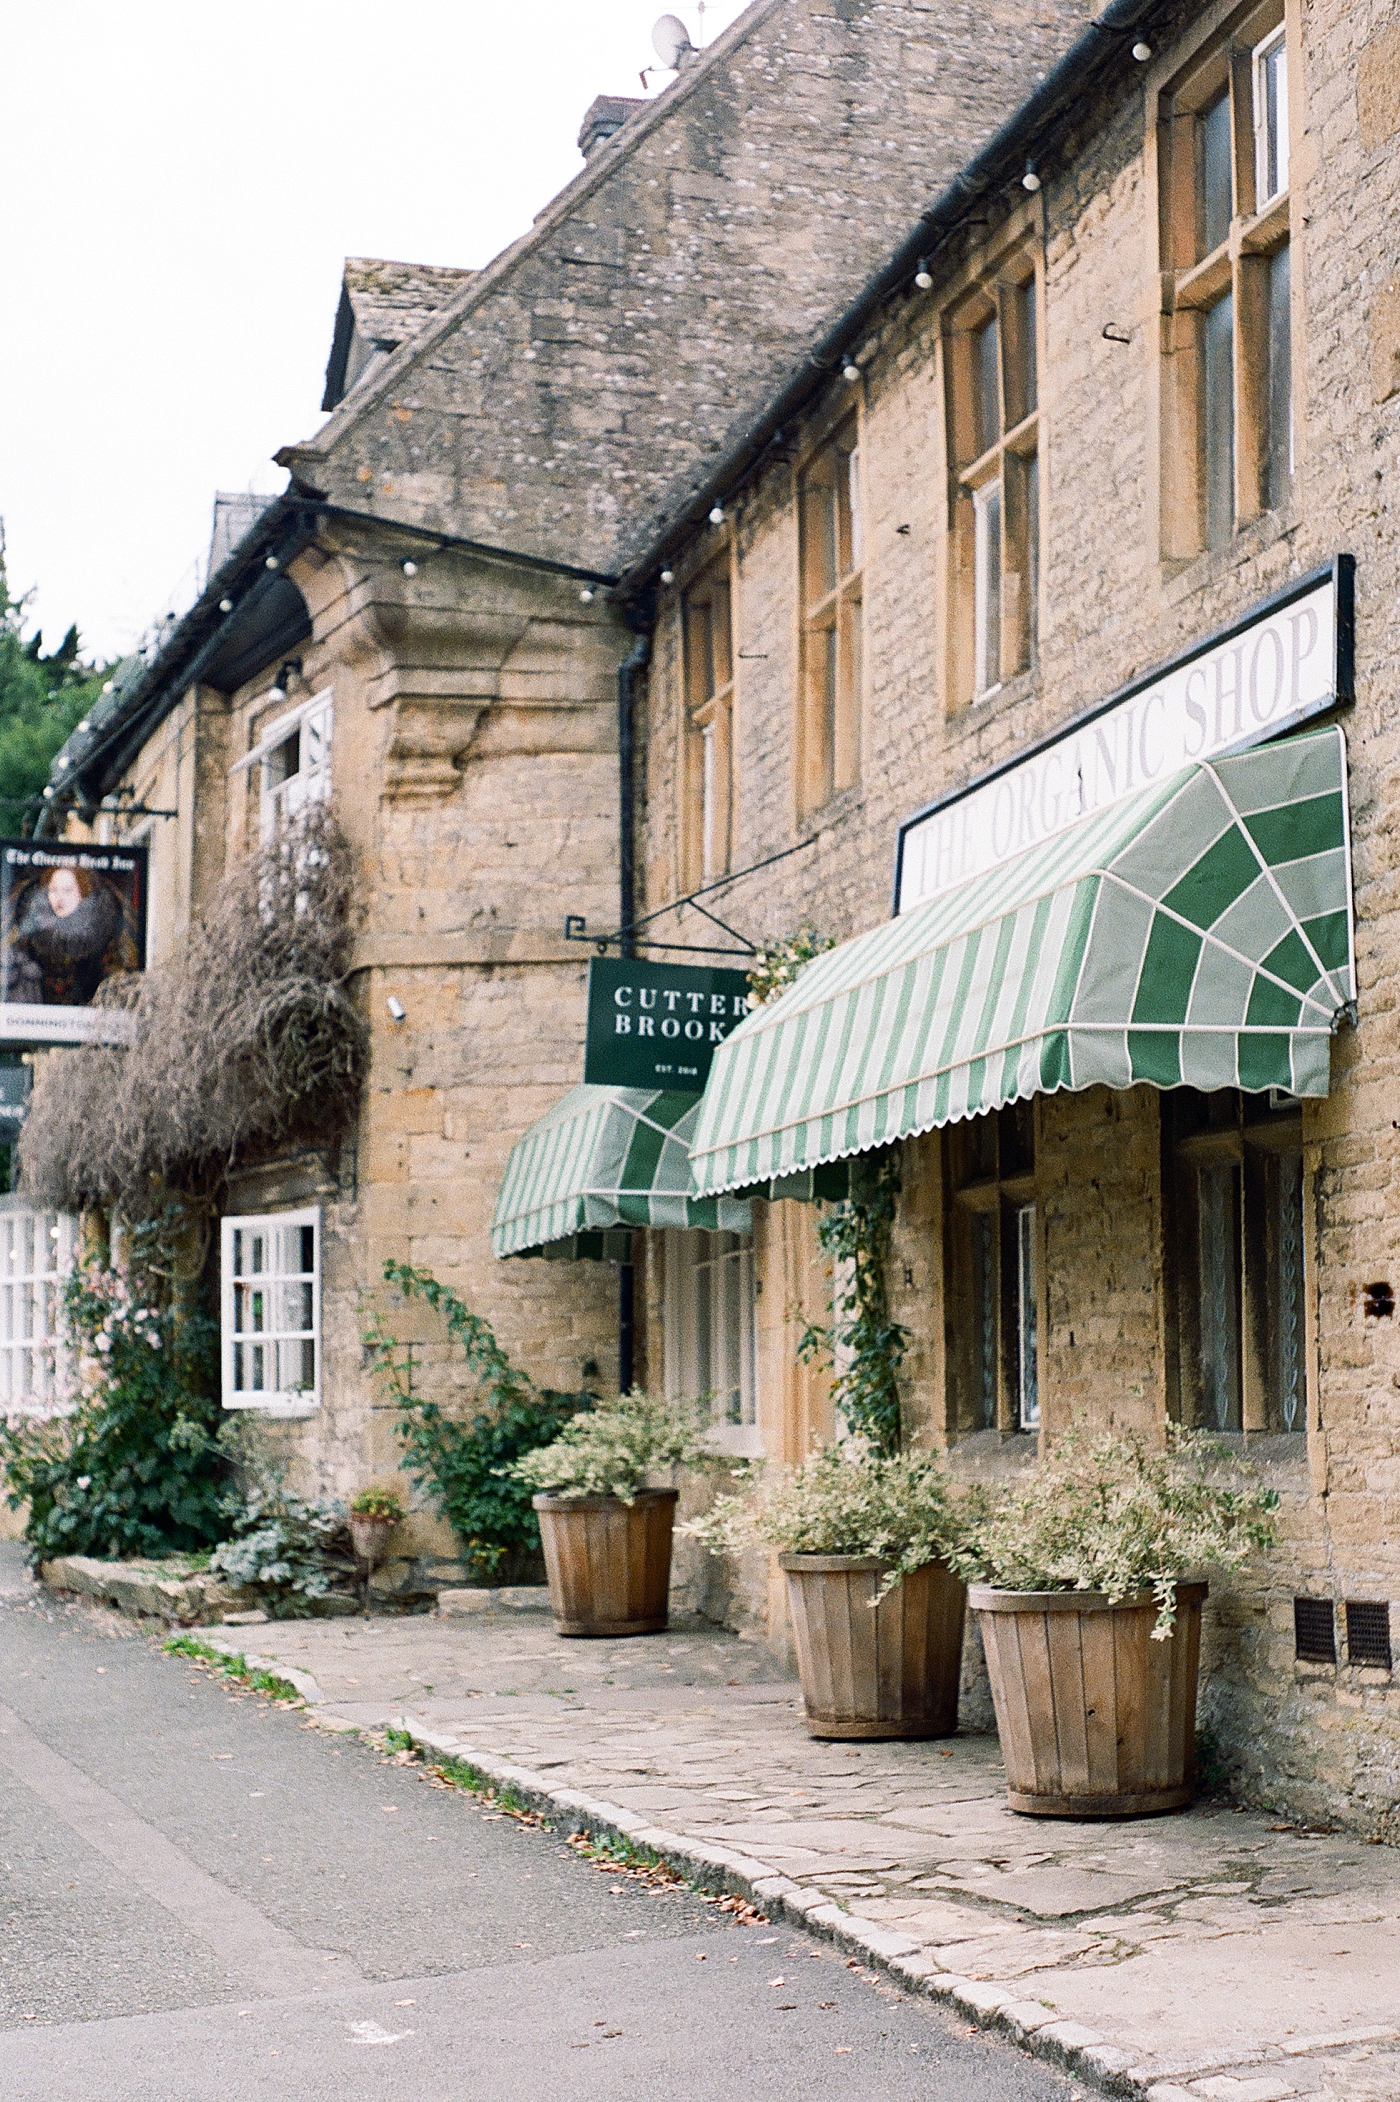 Cutter brook storefront in the Cotswolds | Photo by Hope Helmuth Photography